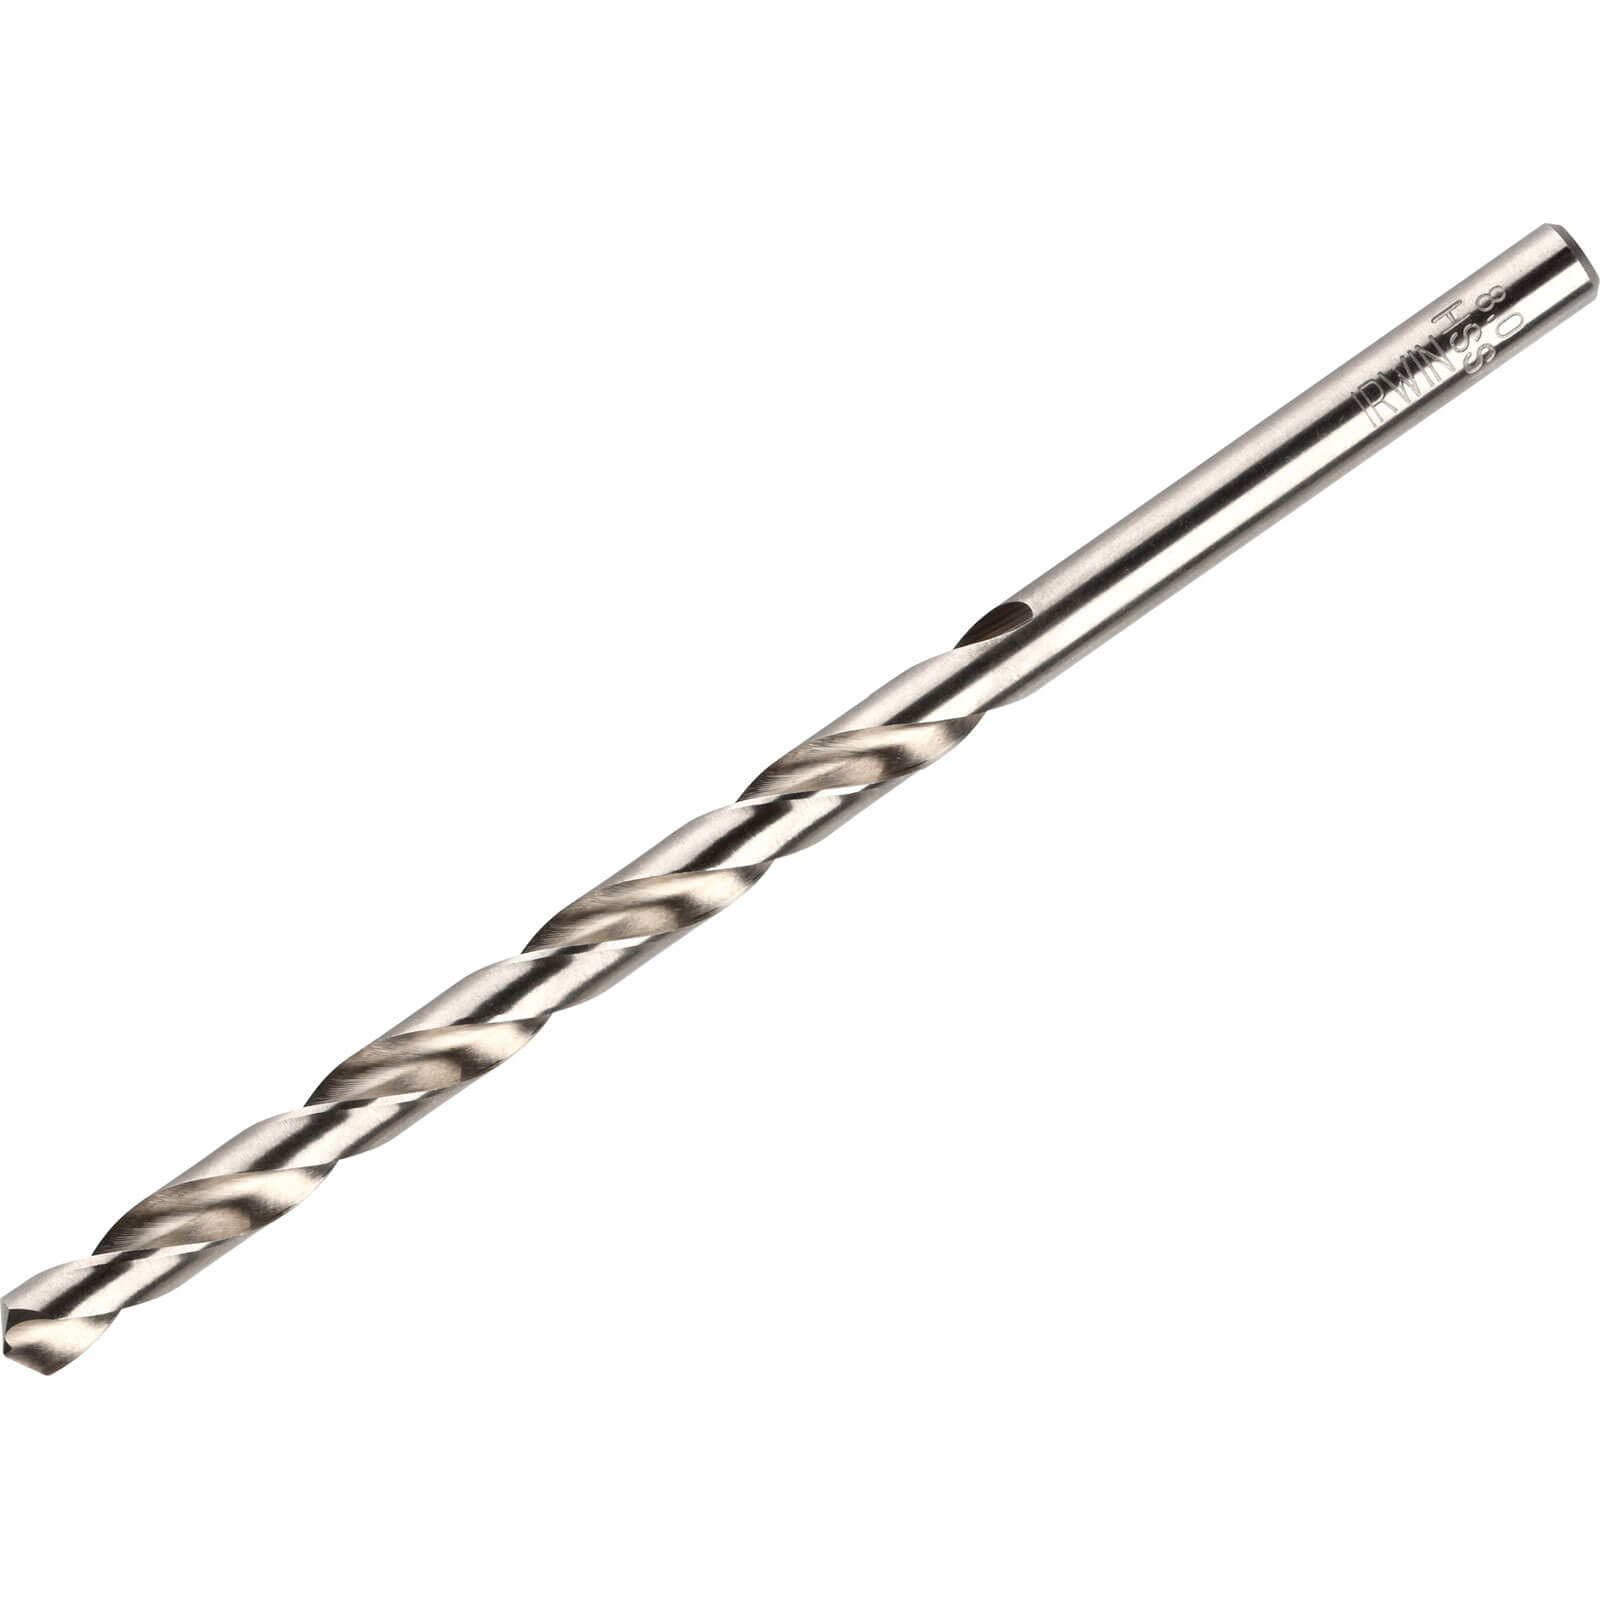 Image of Irwin HSS Long Pro Drill Bits 8mm Pack of 5